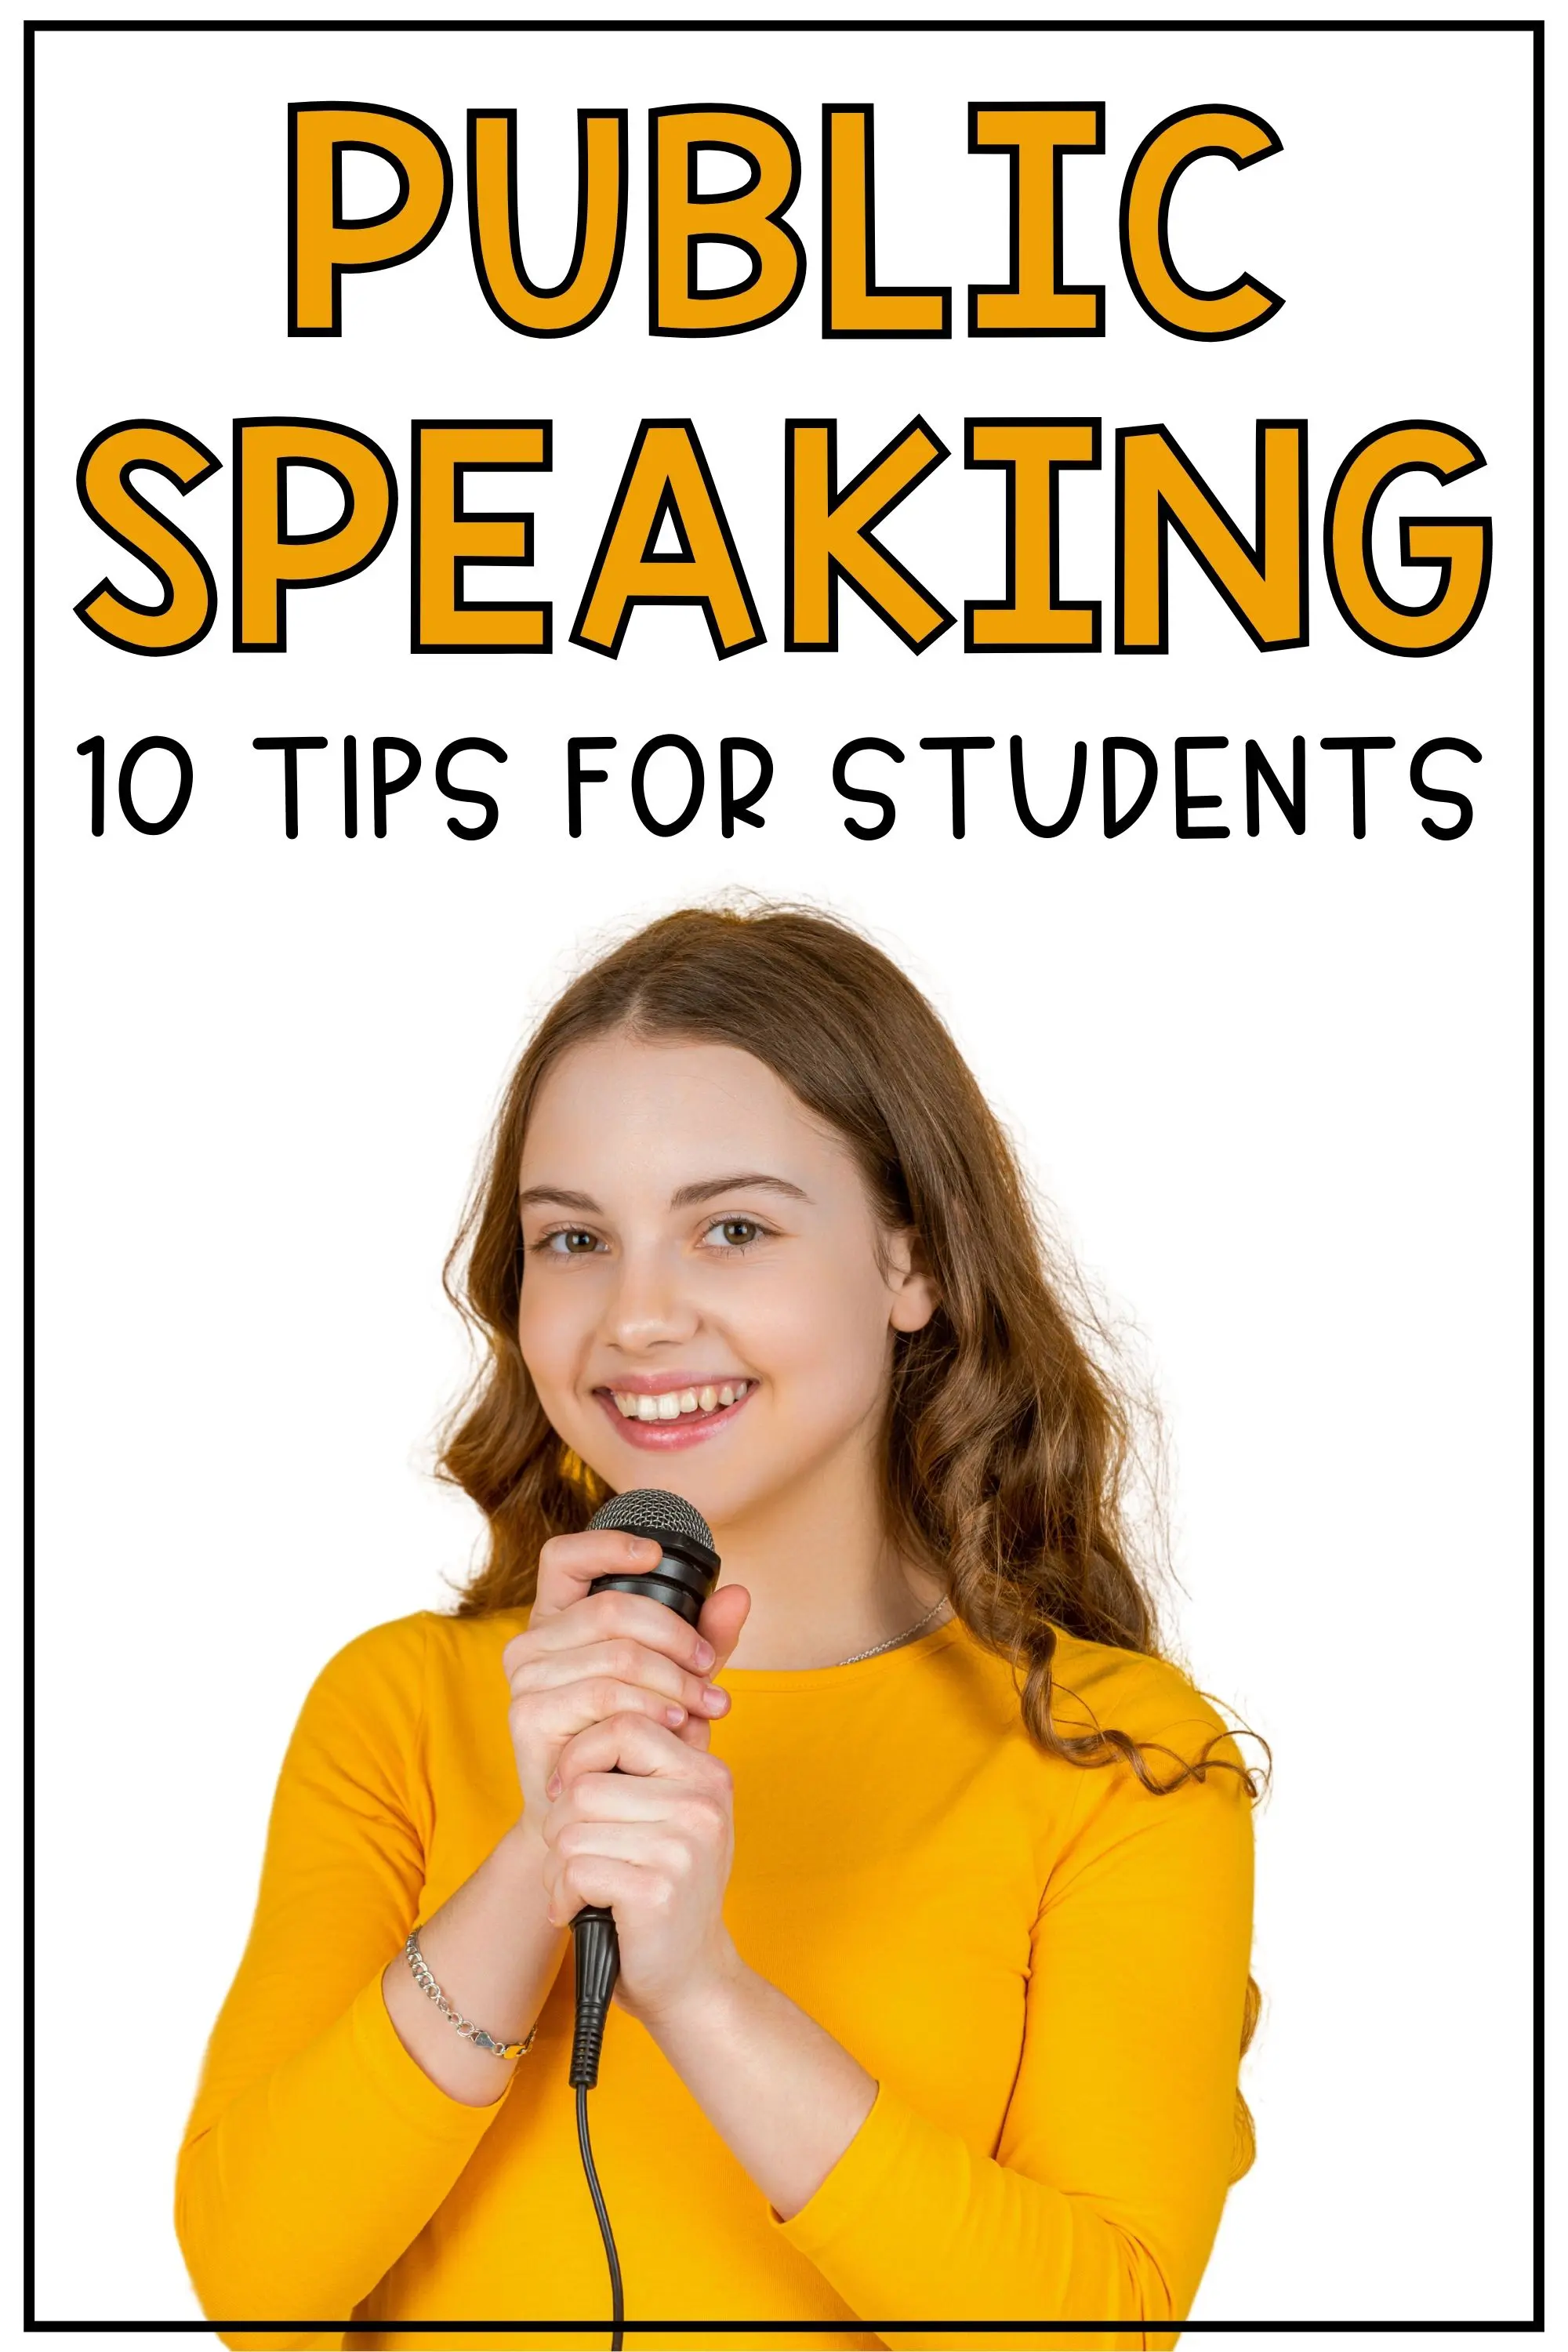 10 Public Speaking Tips for Students